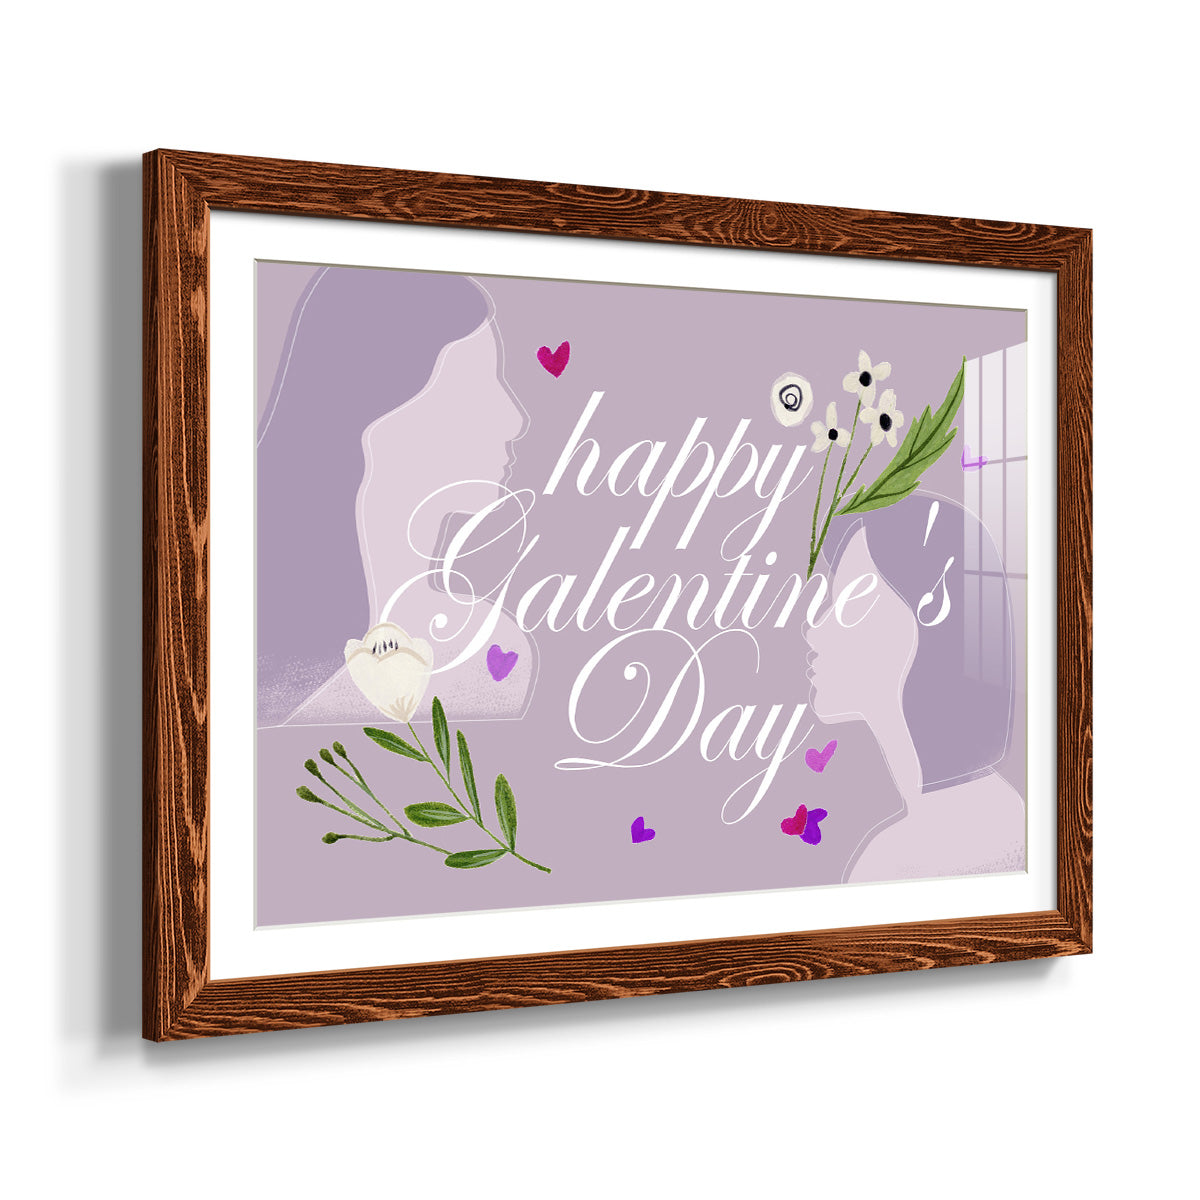 Happy Galentine's Day Collection A-Premium Framed Print - Ready to Hang